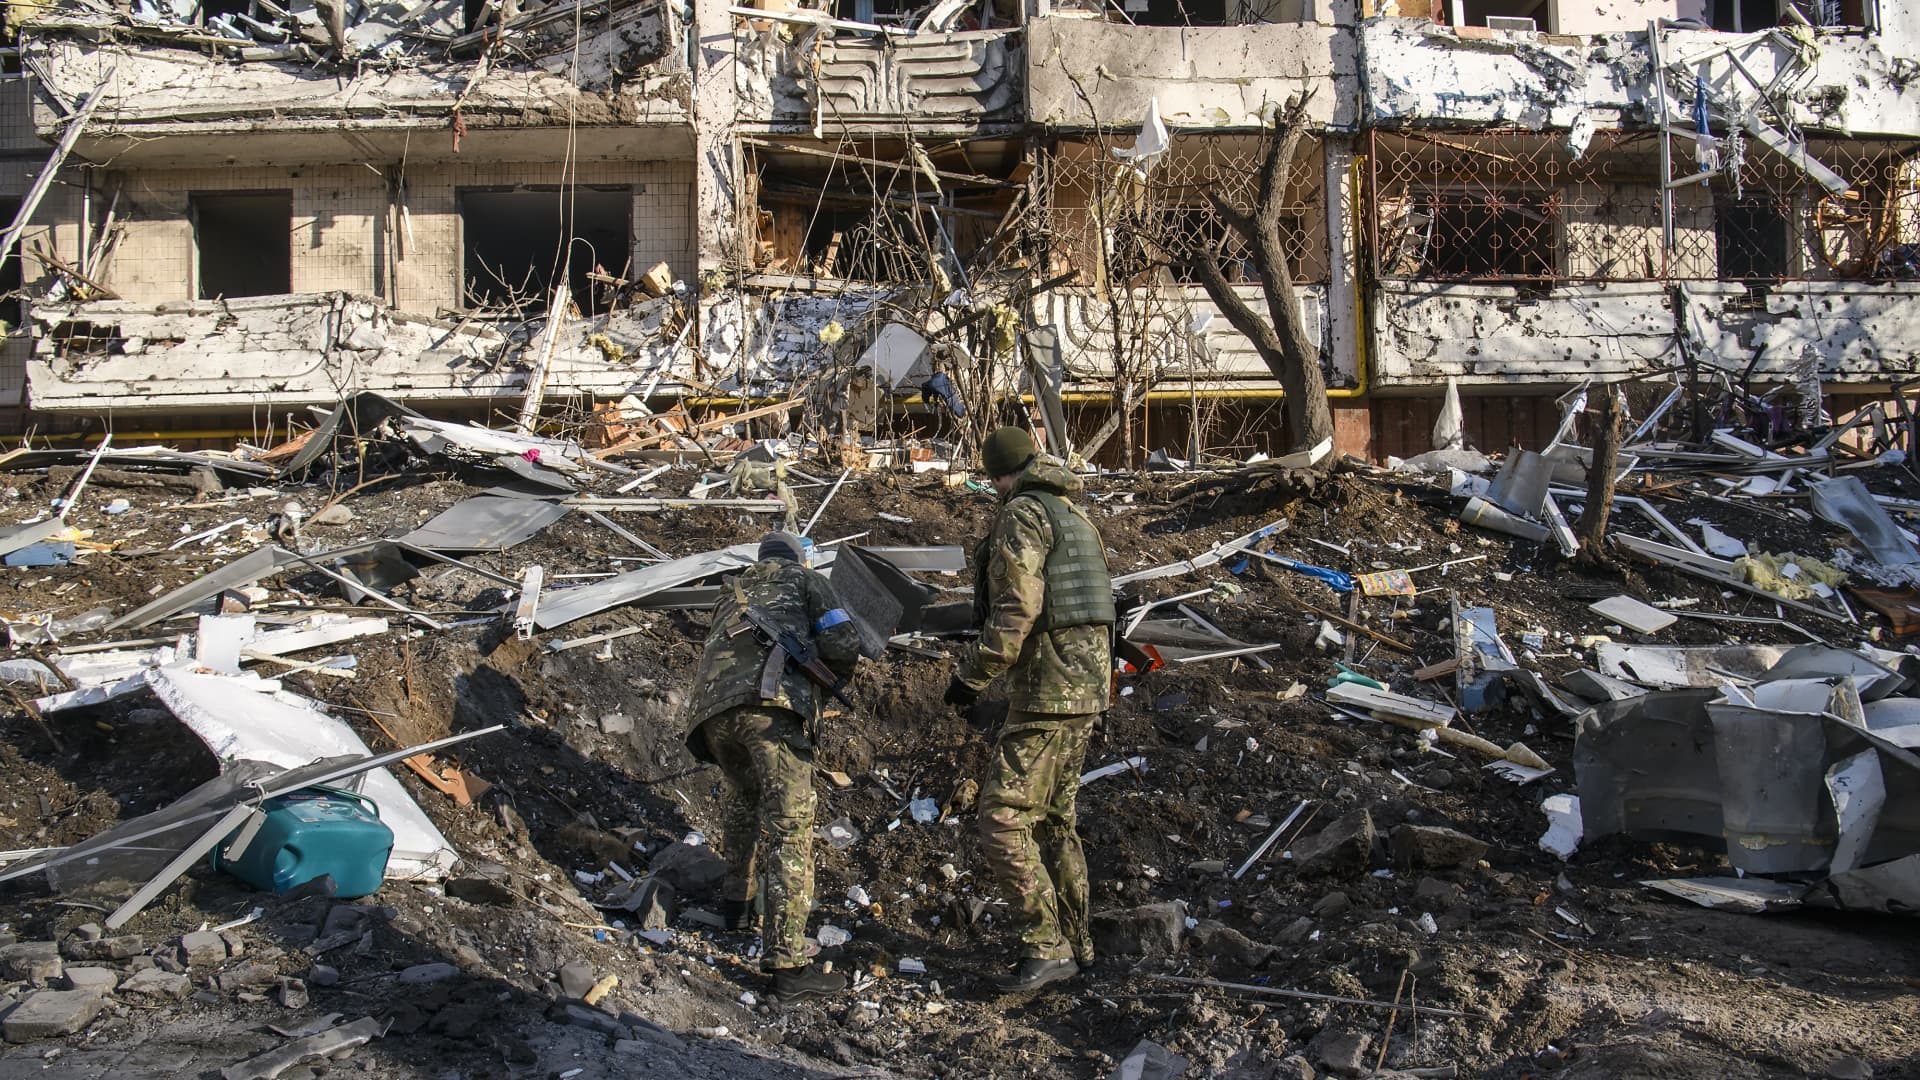 Police experts learn a funnel in the place of explosion of a wing missile near Residential apartment building in residential district of Kyiv after it was hit by shelling early morning as Russia's invasion of Ukraine continues, in Kyiv, Ukraine, March 15, 2022